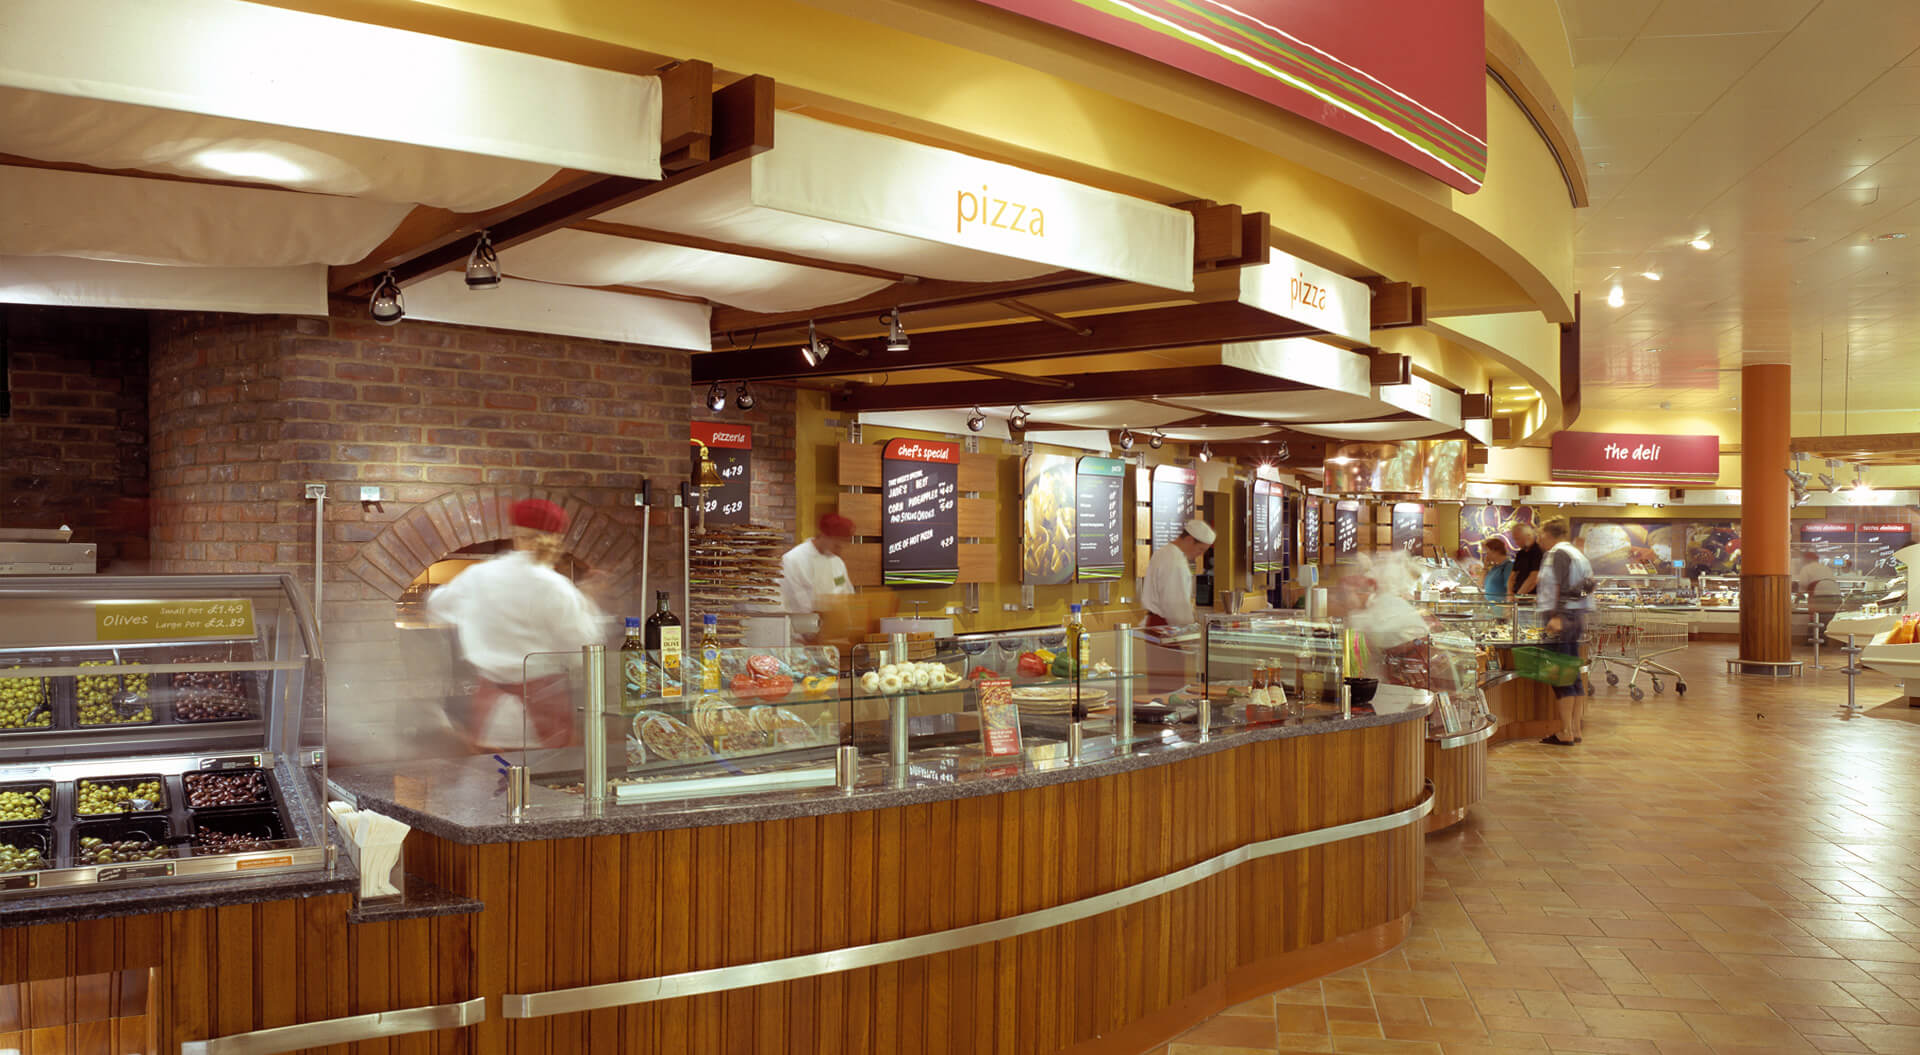 Safeway supermarket interior store design, merchandising and branding for hot food pizza and grill bar counters